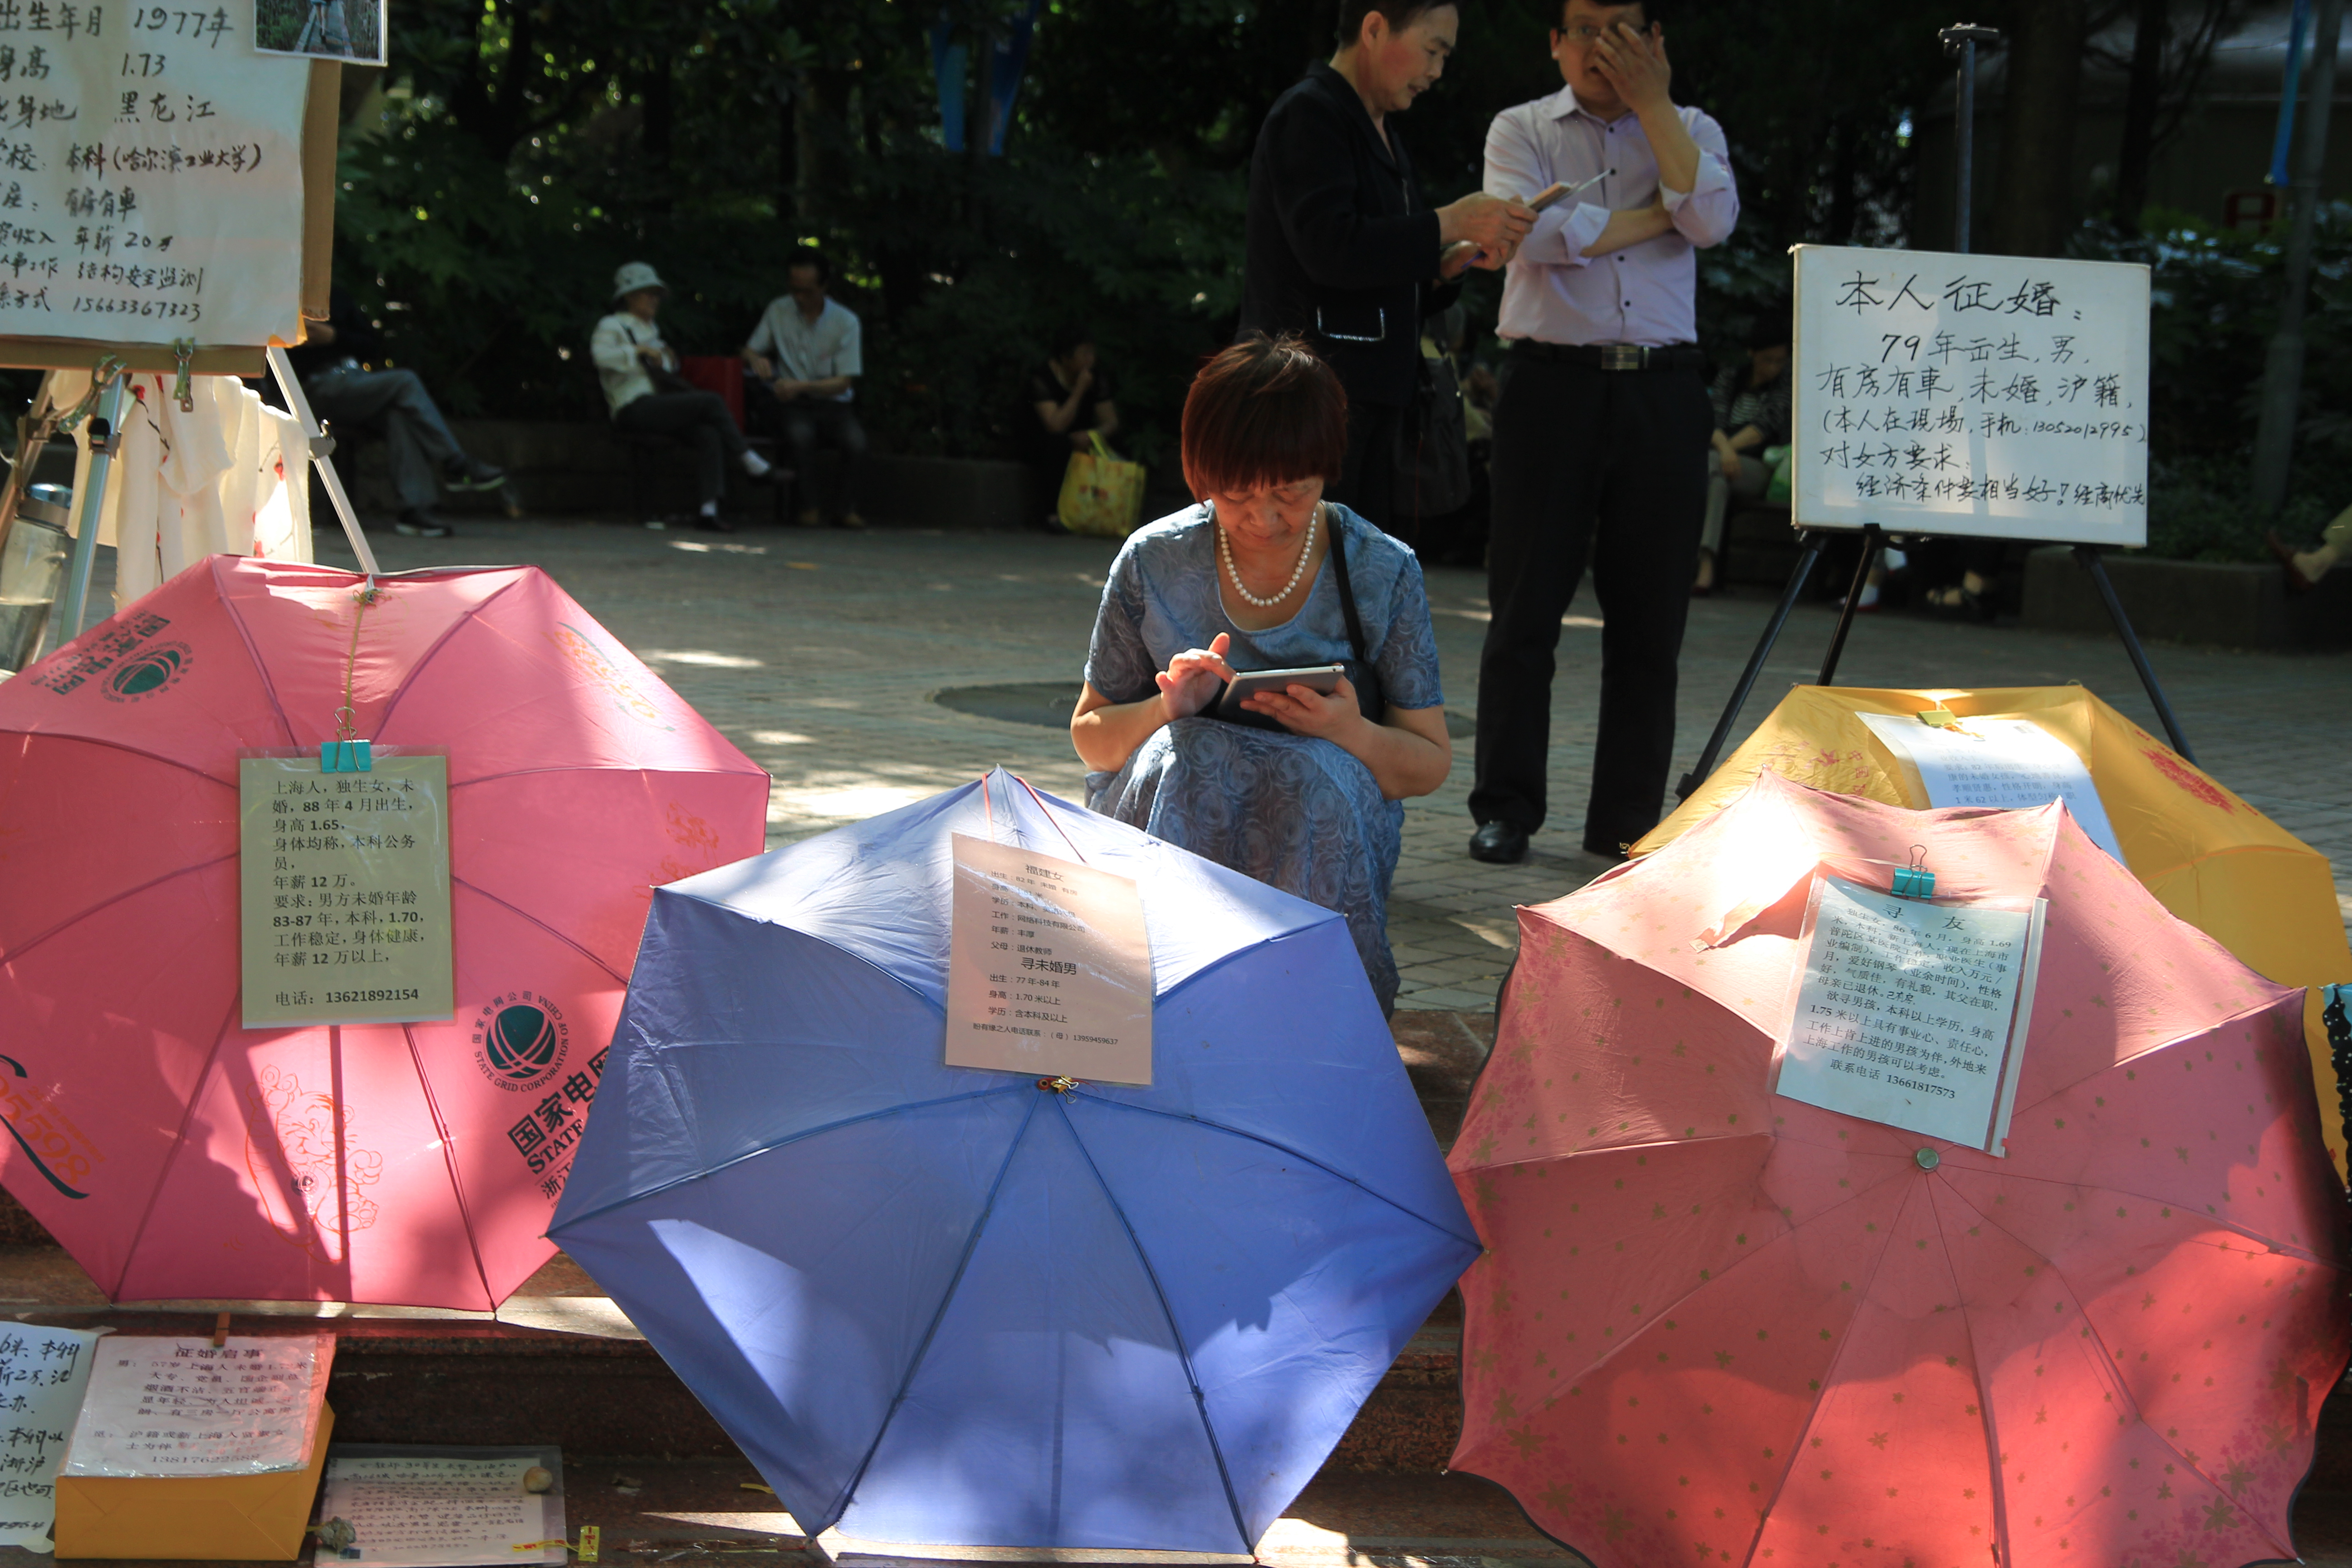 A woman sits behind umbrellas at the Shanghai marriage market